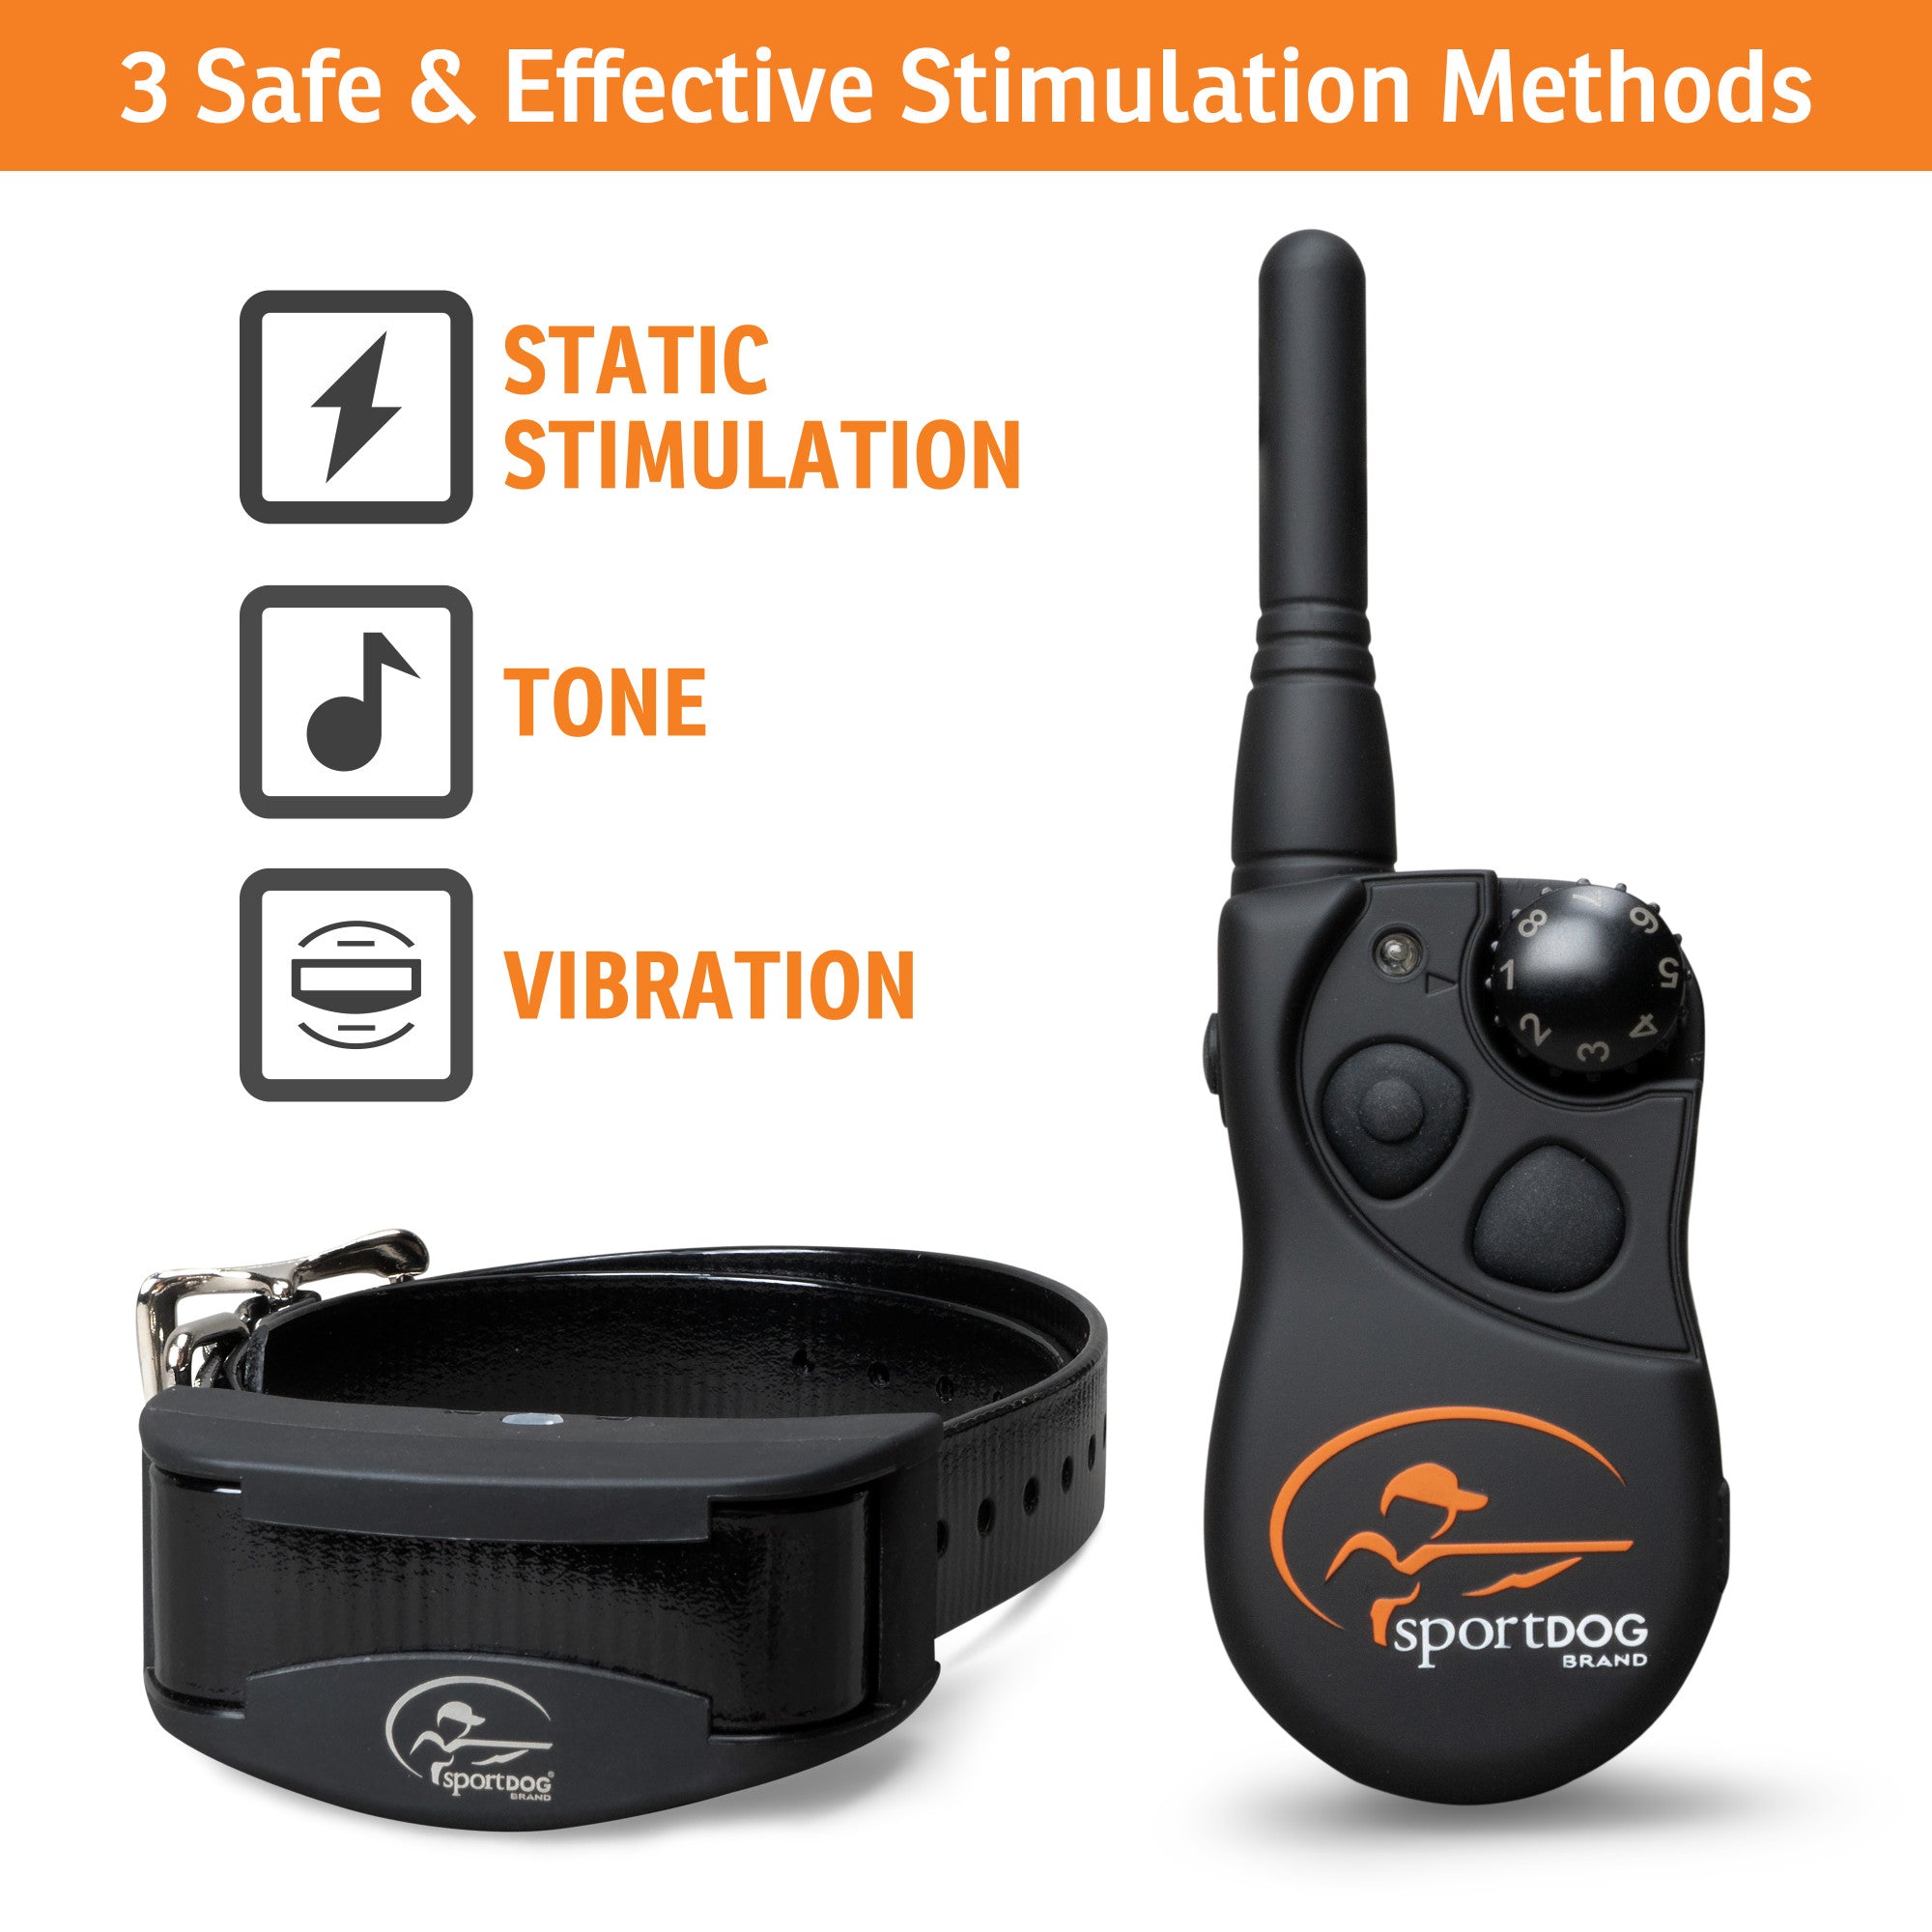 SportDOG Brand FieldTrainer 425X Remote Trainer - Rechargeable Dog Training  Collar with Shock, Vibrate, and Tone - 500 Yard Range - SD-425X